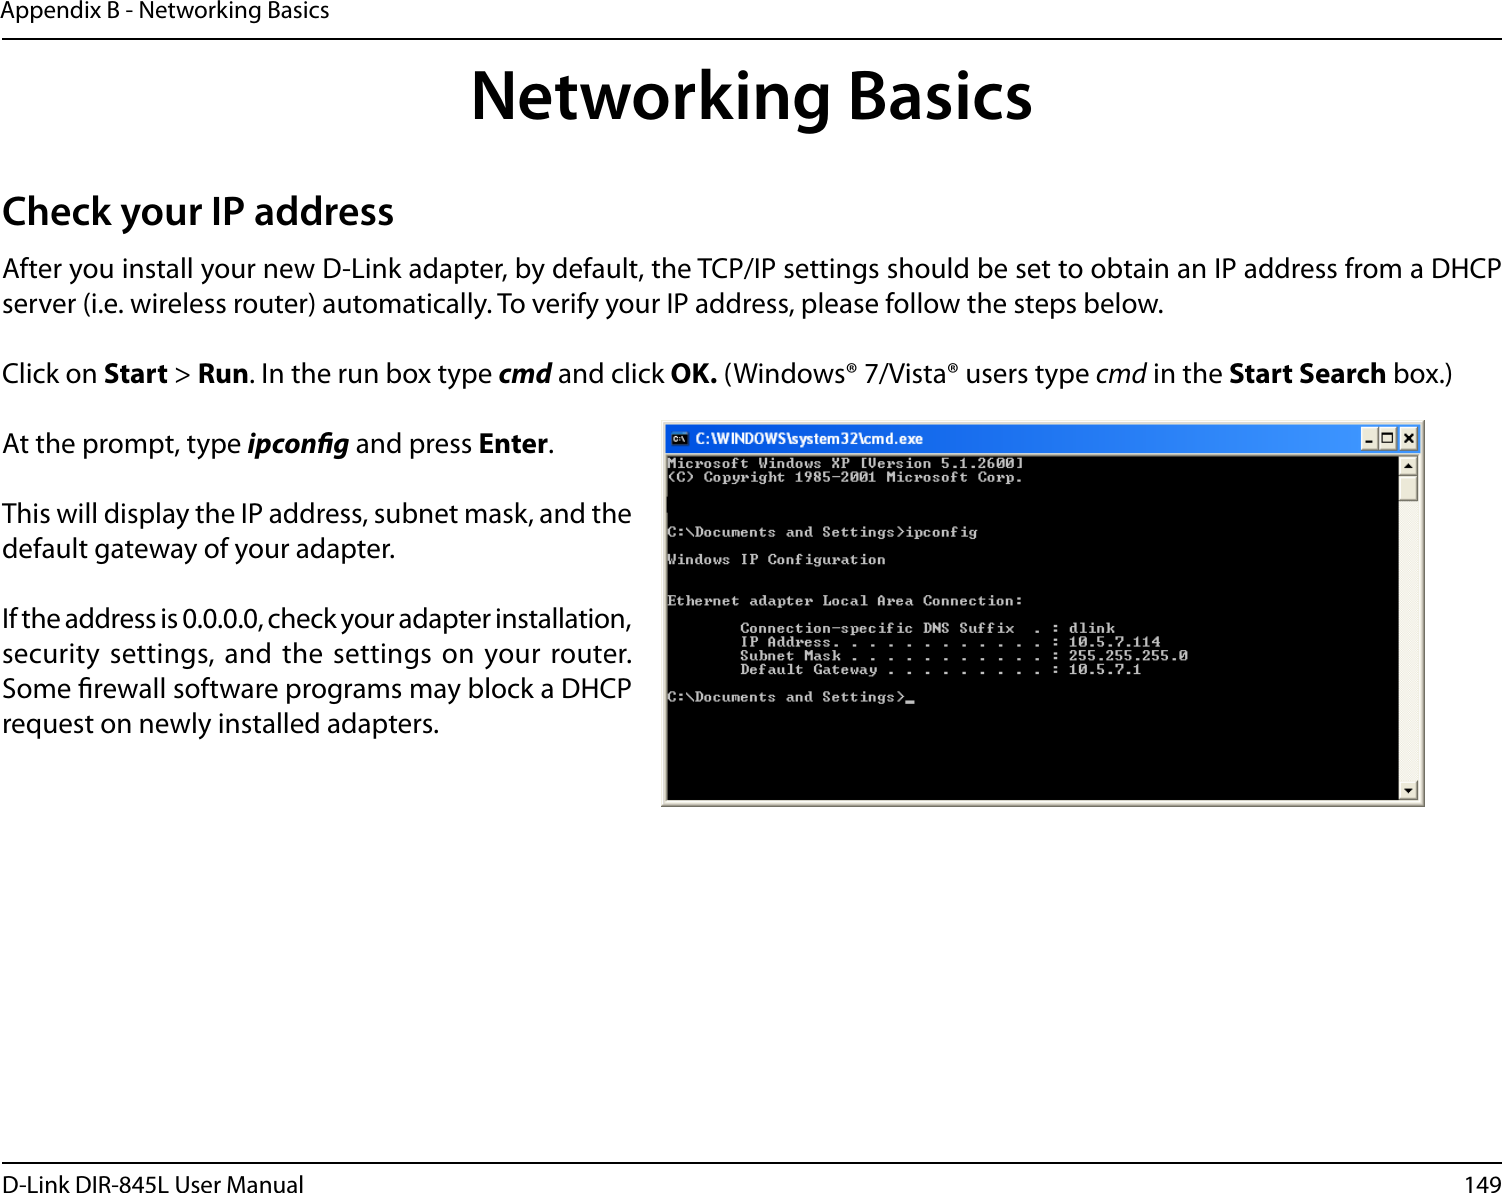 149D-Link DIR-845L User ManualAppendix B - Networking BasicsNetworking BasicsCheck your IP addressAfter you install your new D-Link adapter, by default, the TCP/IP settings should be set to obtain an IP address from a DHCP server (i.e. wireless router) automatically. To verify your IP address, please follow the steps below.Click on Start &gt; Run. In the run box type cmd and click OK. (Windows® 7/Vista® users type cmd in the Start Search box.)At the prompt, type ipcong and press Enter.This will display the IP address, subnet mask, and the default gateway of your adapter.If the address is 0.0.0.0, check your adapter installation, security  settings, and the  settings on your router. Some rewall software programs may block a DHCP request on newly installed adapters. 